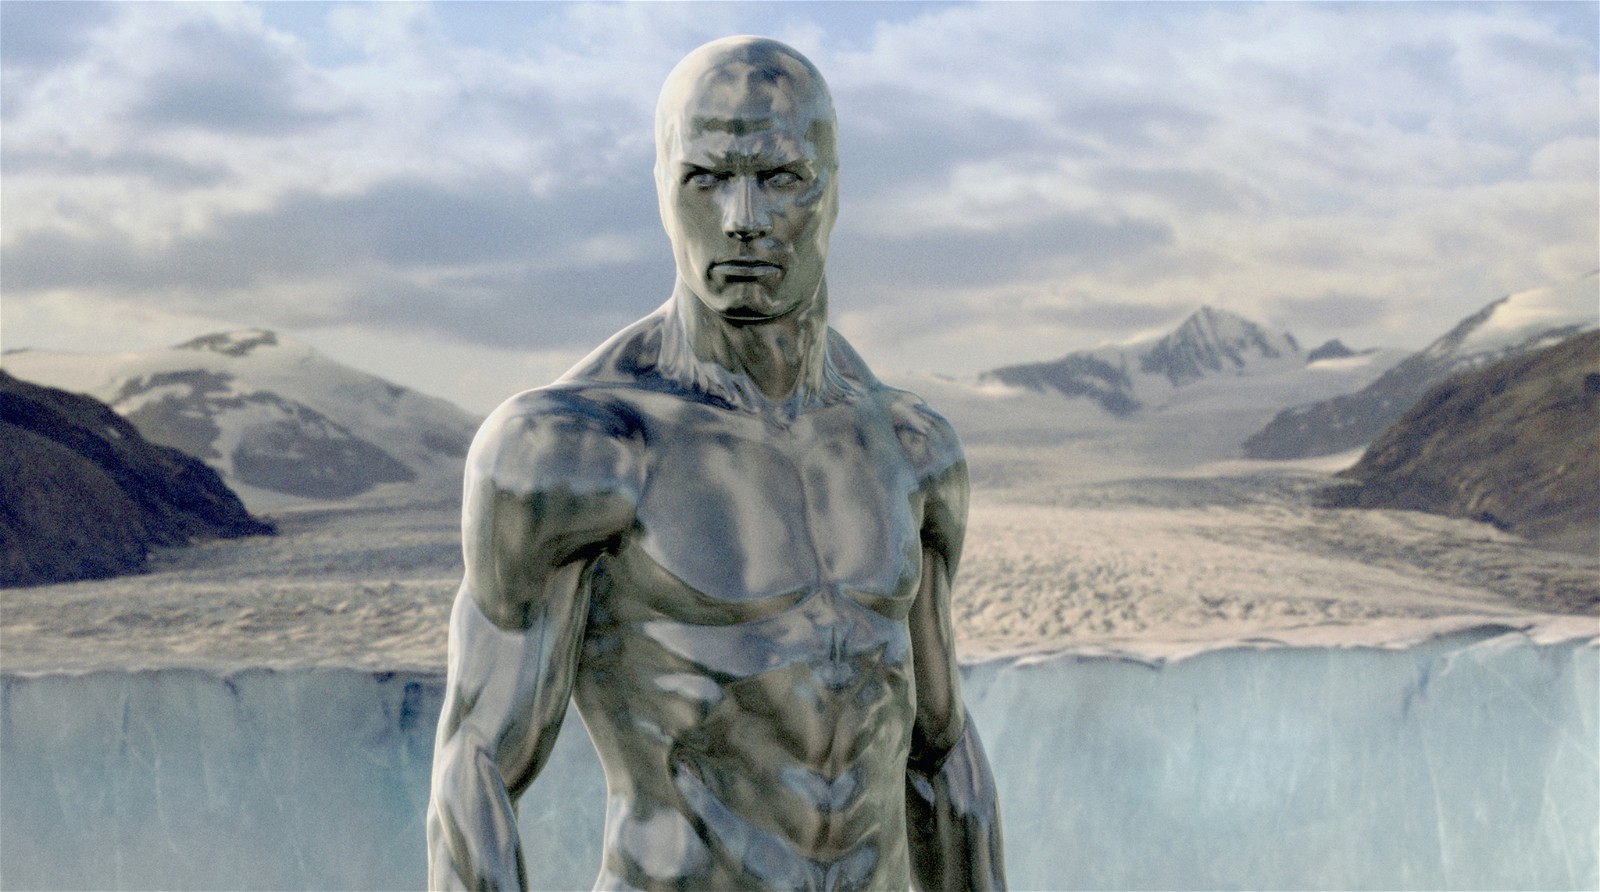 A still from Fantastic Four: Rise of the Silver Surfer